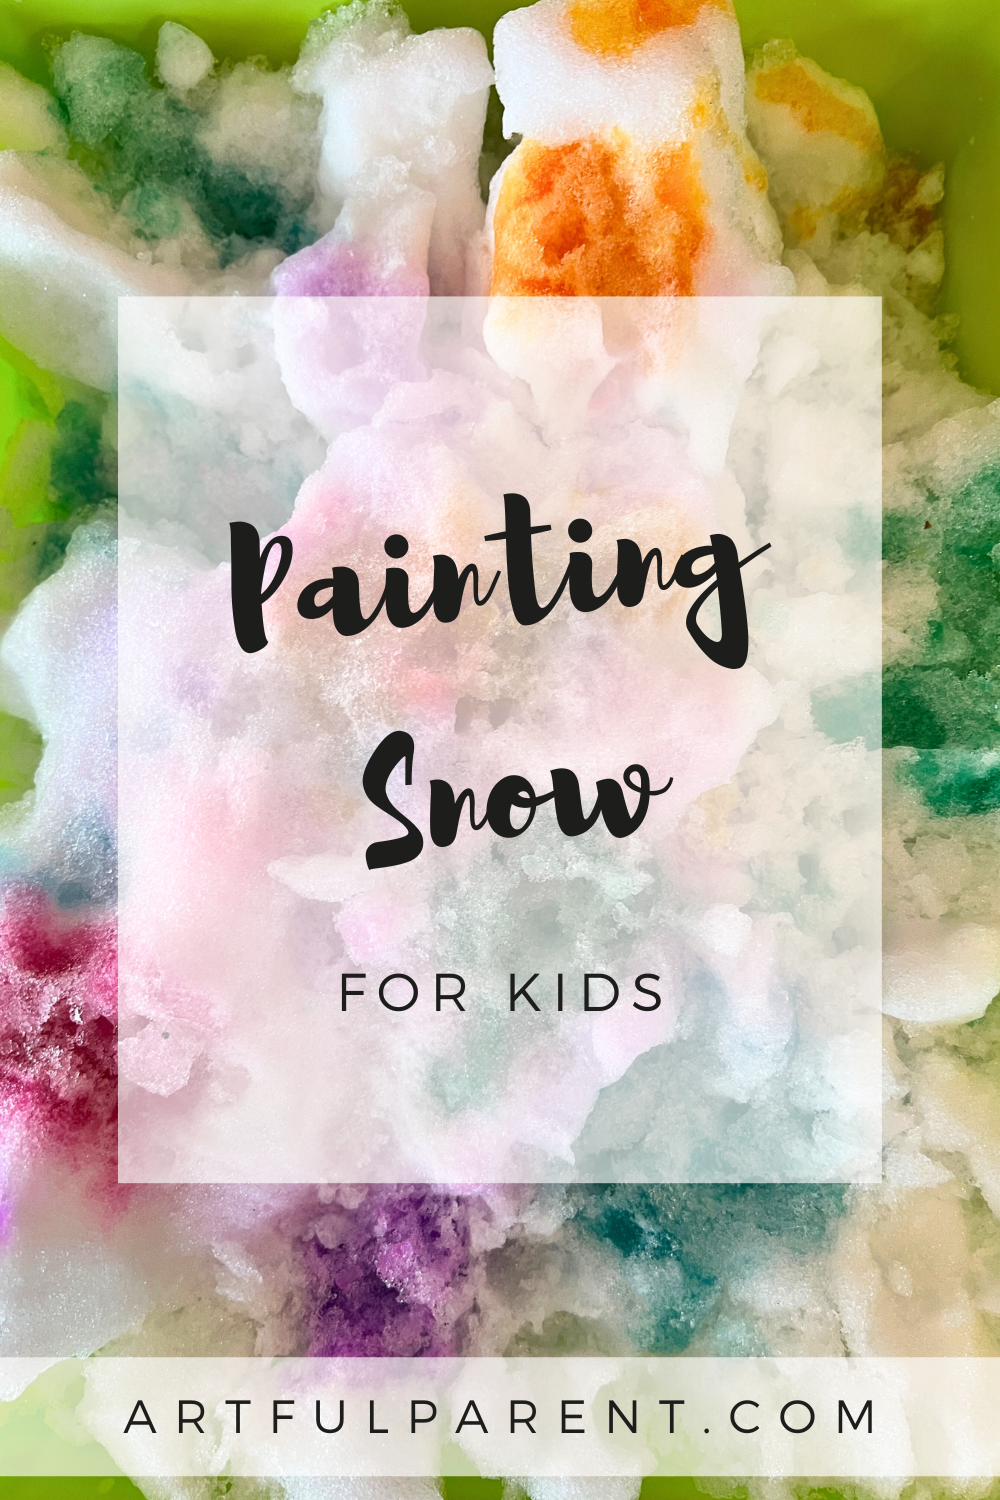 How to Paint Snow for Kids